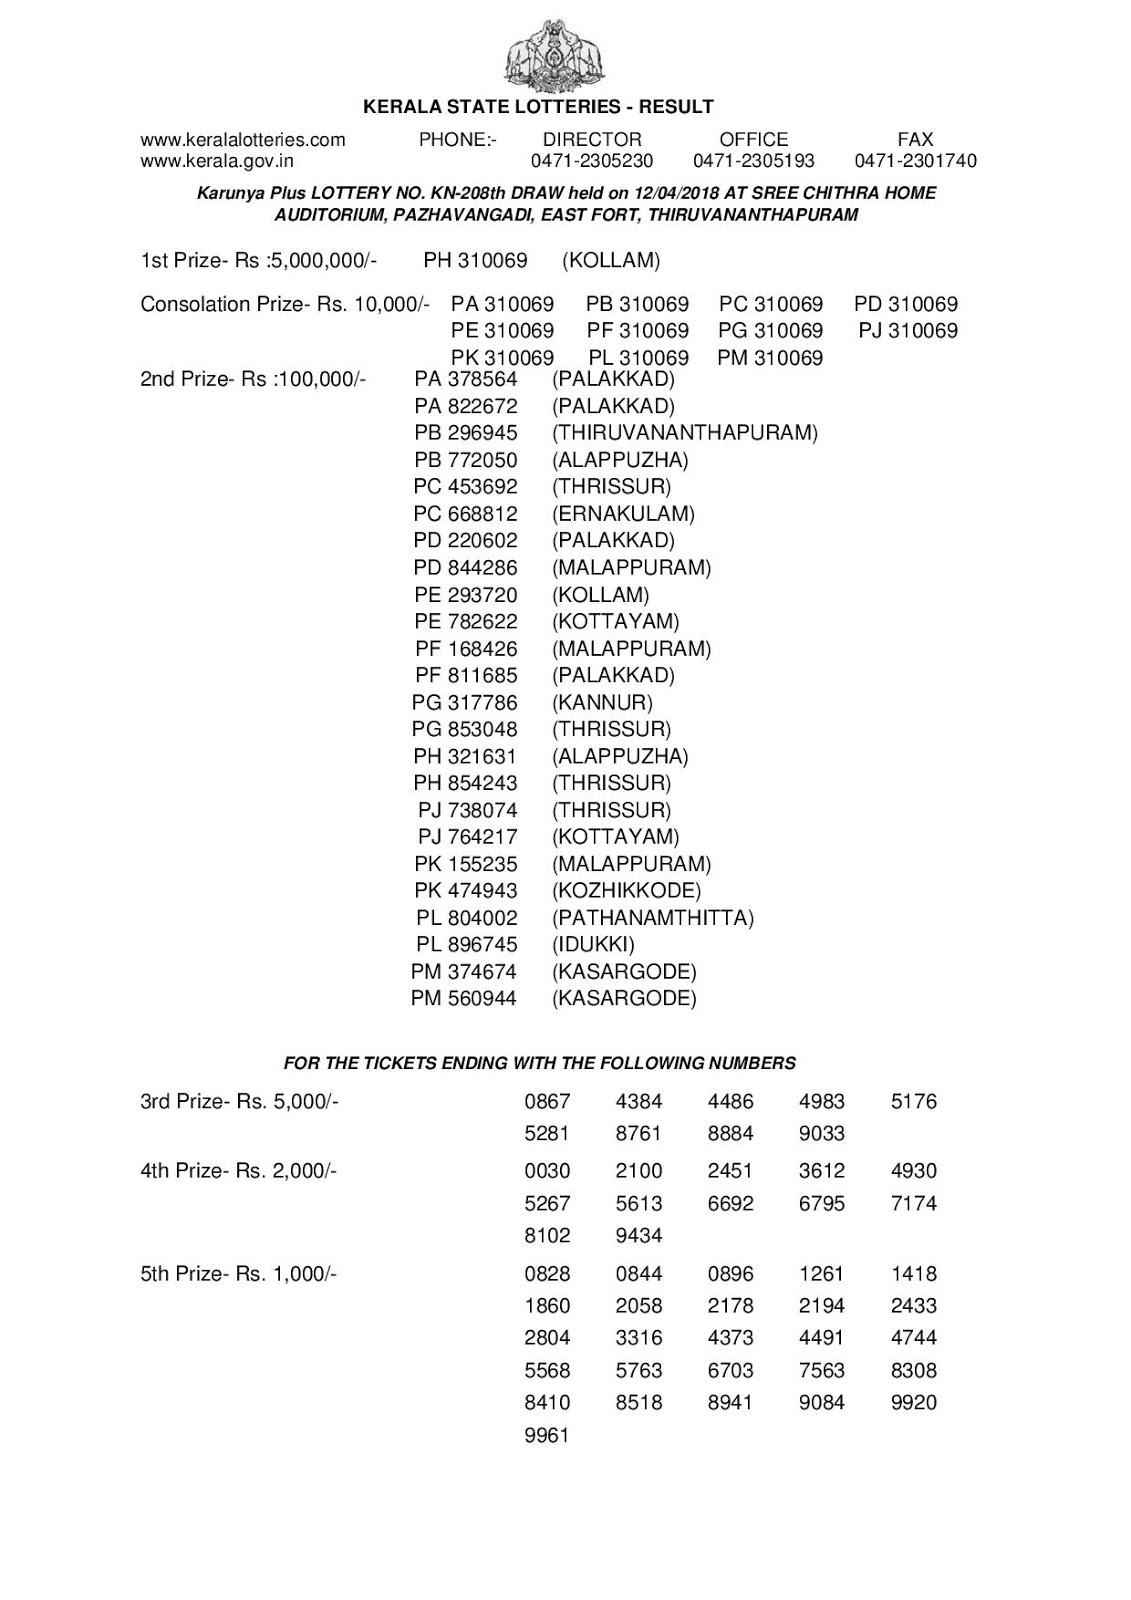 Kerala Lottery Result 12.04.2018 Karunya Plus KN-208 Lottery Results Official PDF